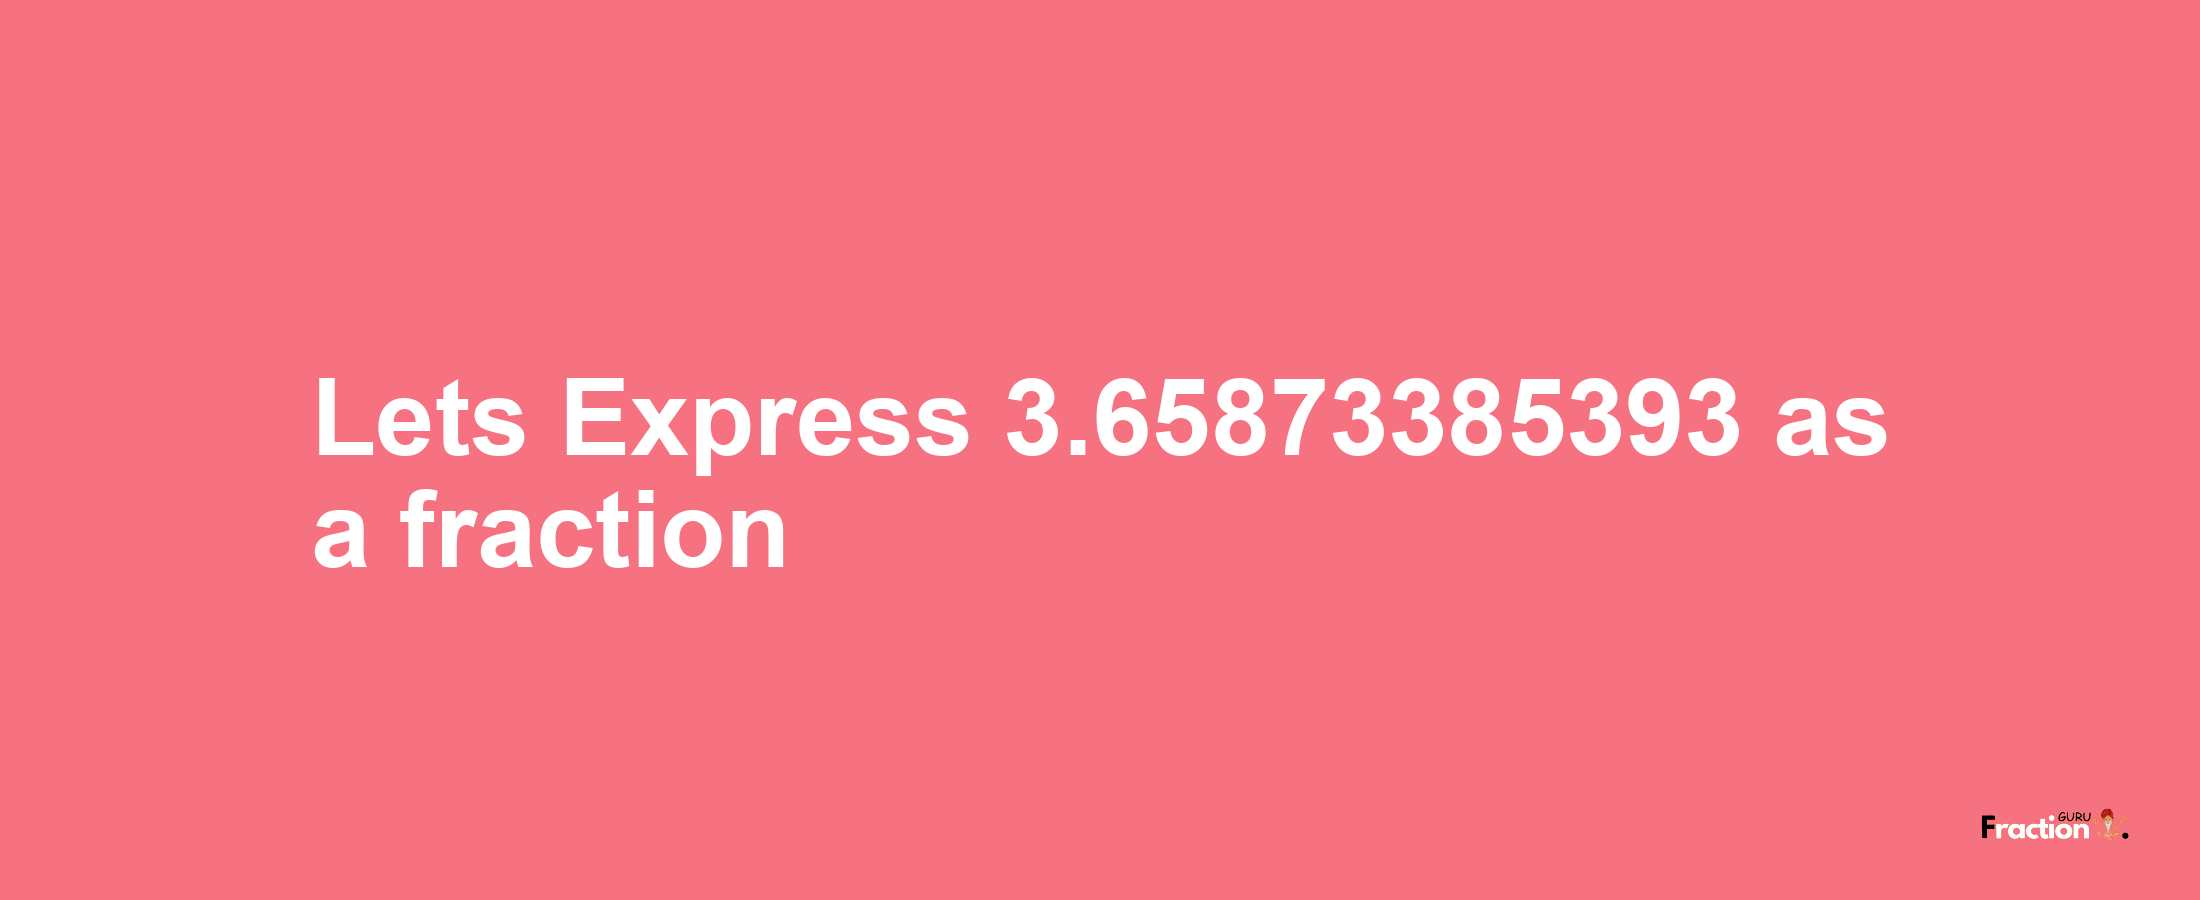 Lets Express 3.65873385393 as afraction